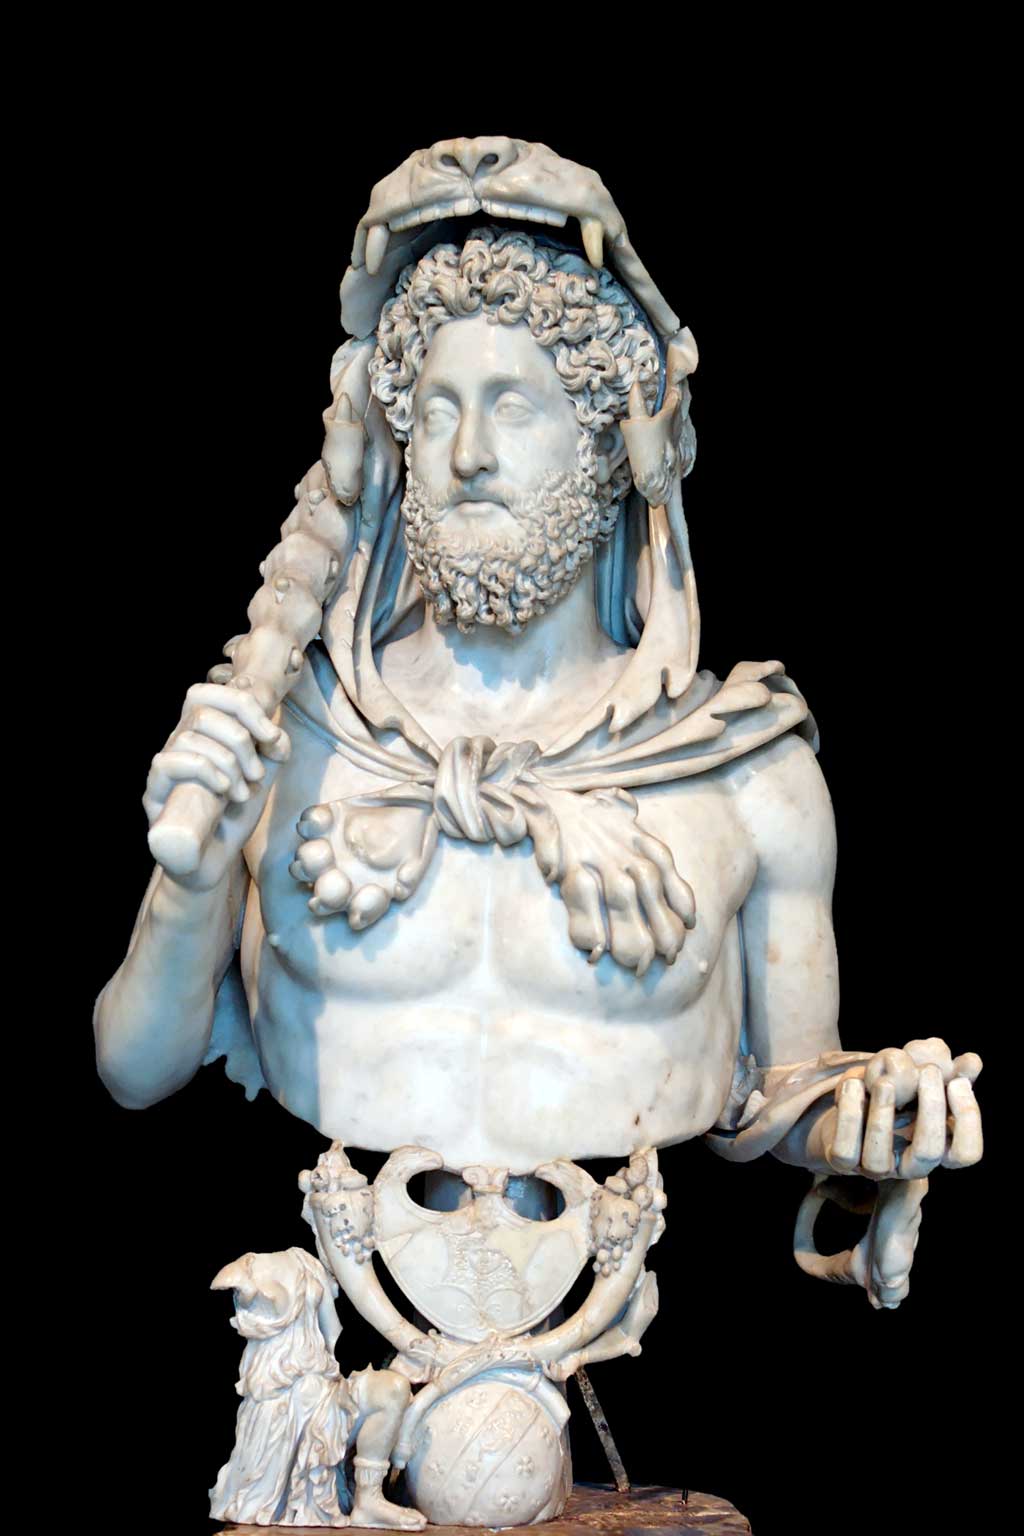 This is a bust of Commodous in which the bearded emperor wears lion headdress emblematic of his belief that he was a reincarnation of Hercules.